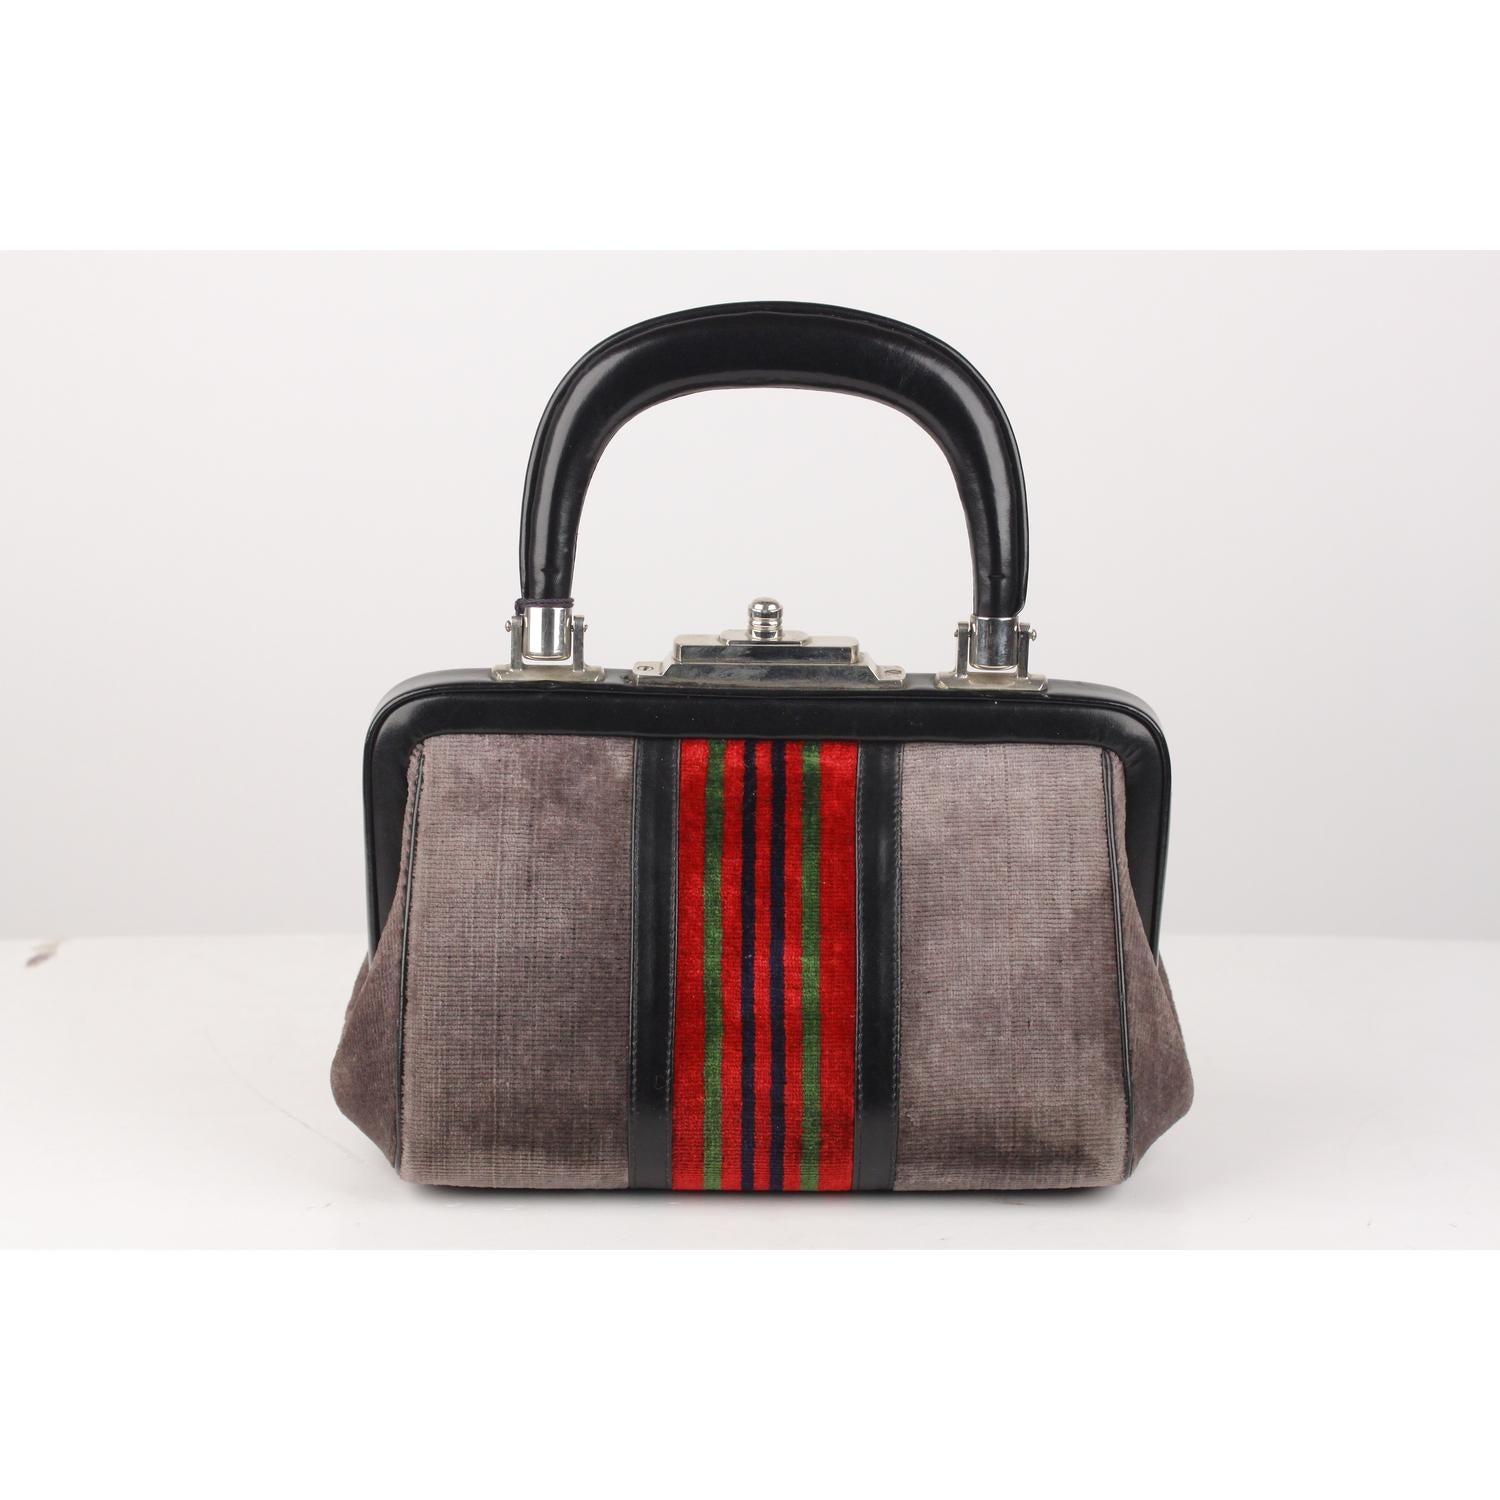 Gorgeous ROBERTA DI CAMERINO Small 'Bagonghi' Doctor Bag! Classic style in gray velvet with striped detailing on the front. It features a leather top-handle and a push-lock closure. Leather lined interior with zipper and open pockets. It is a